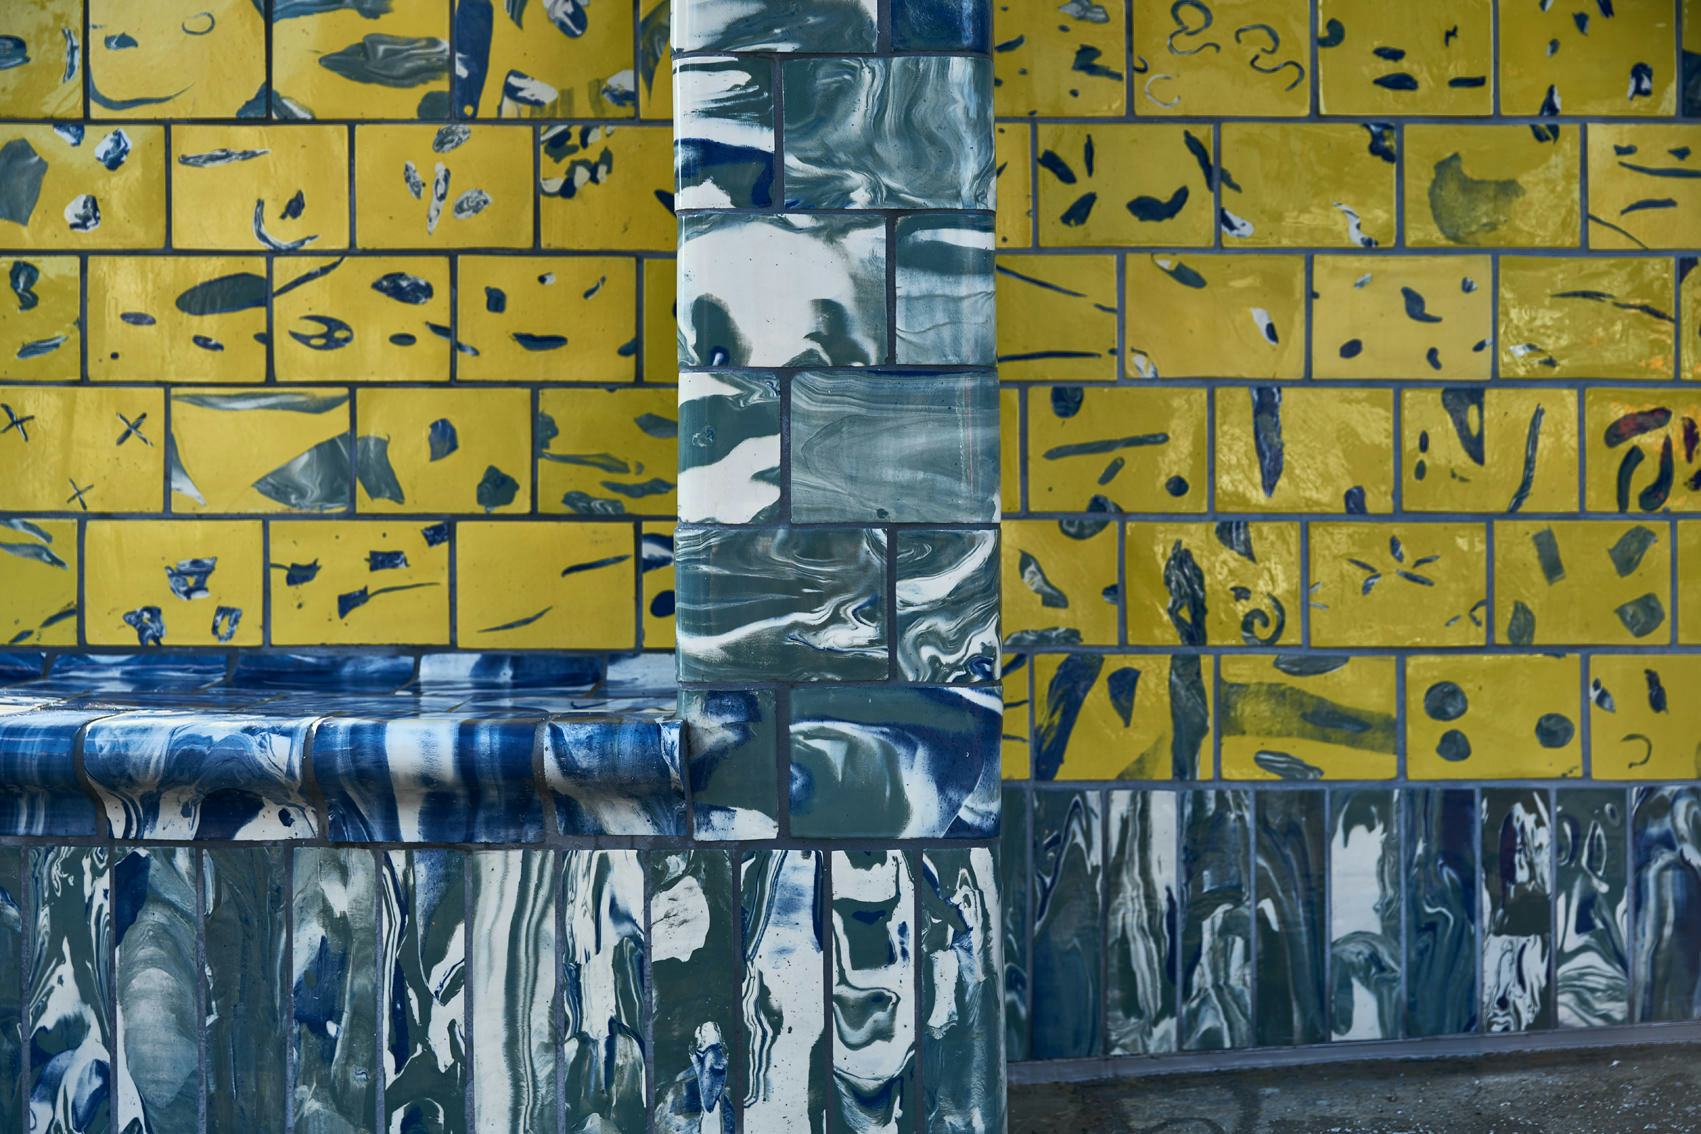 A detail showing handmade yellow and blue tiles on a transport kiosk